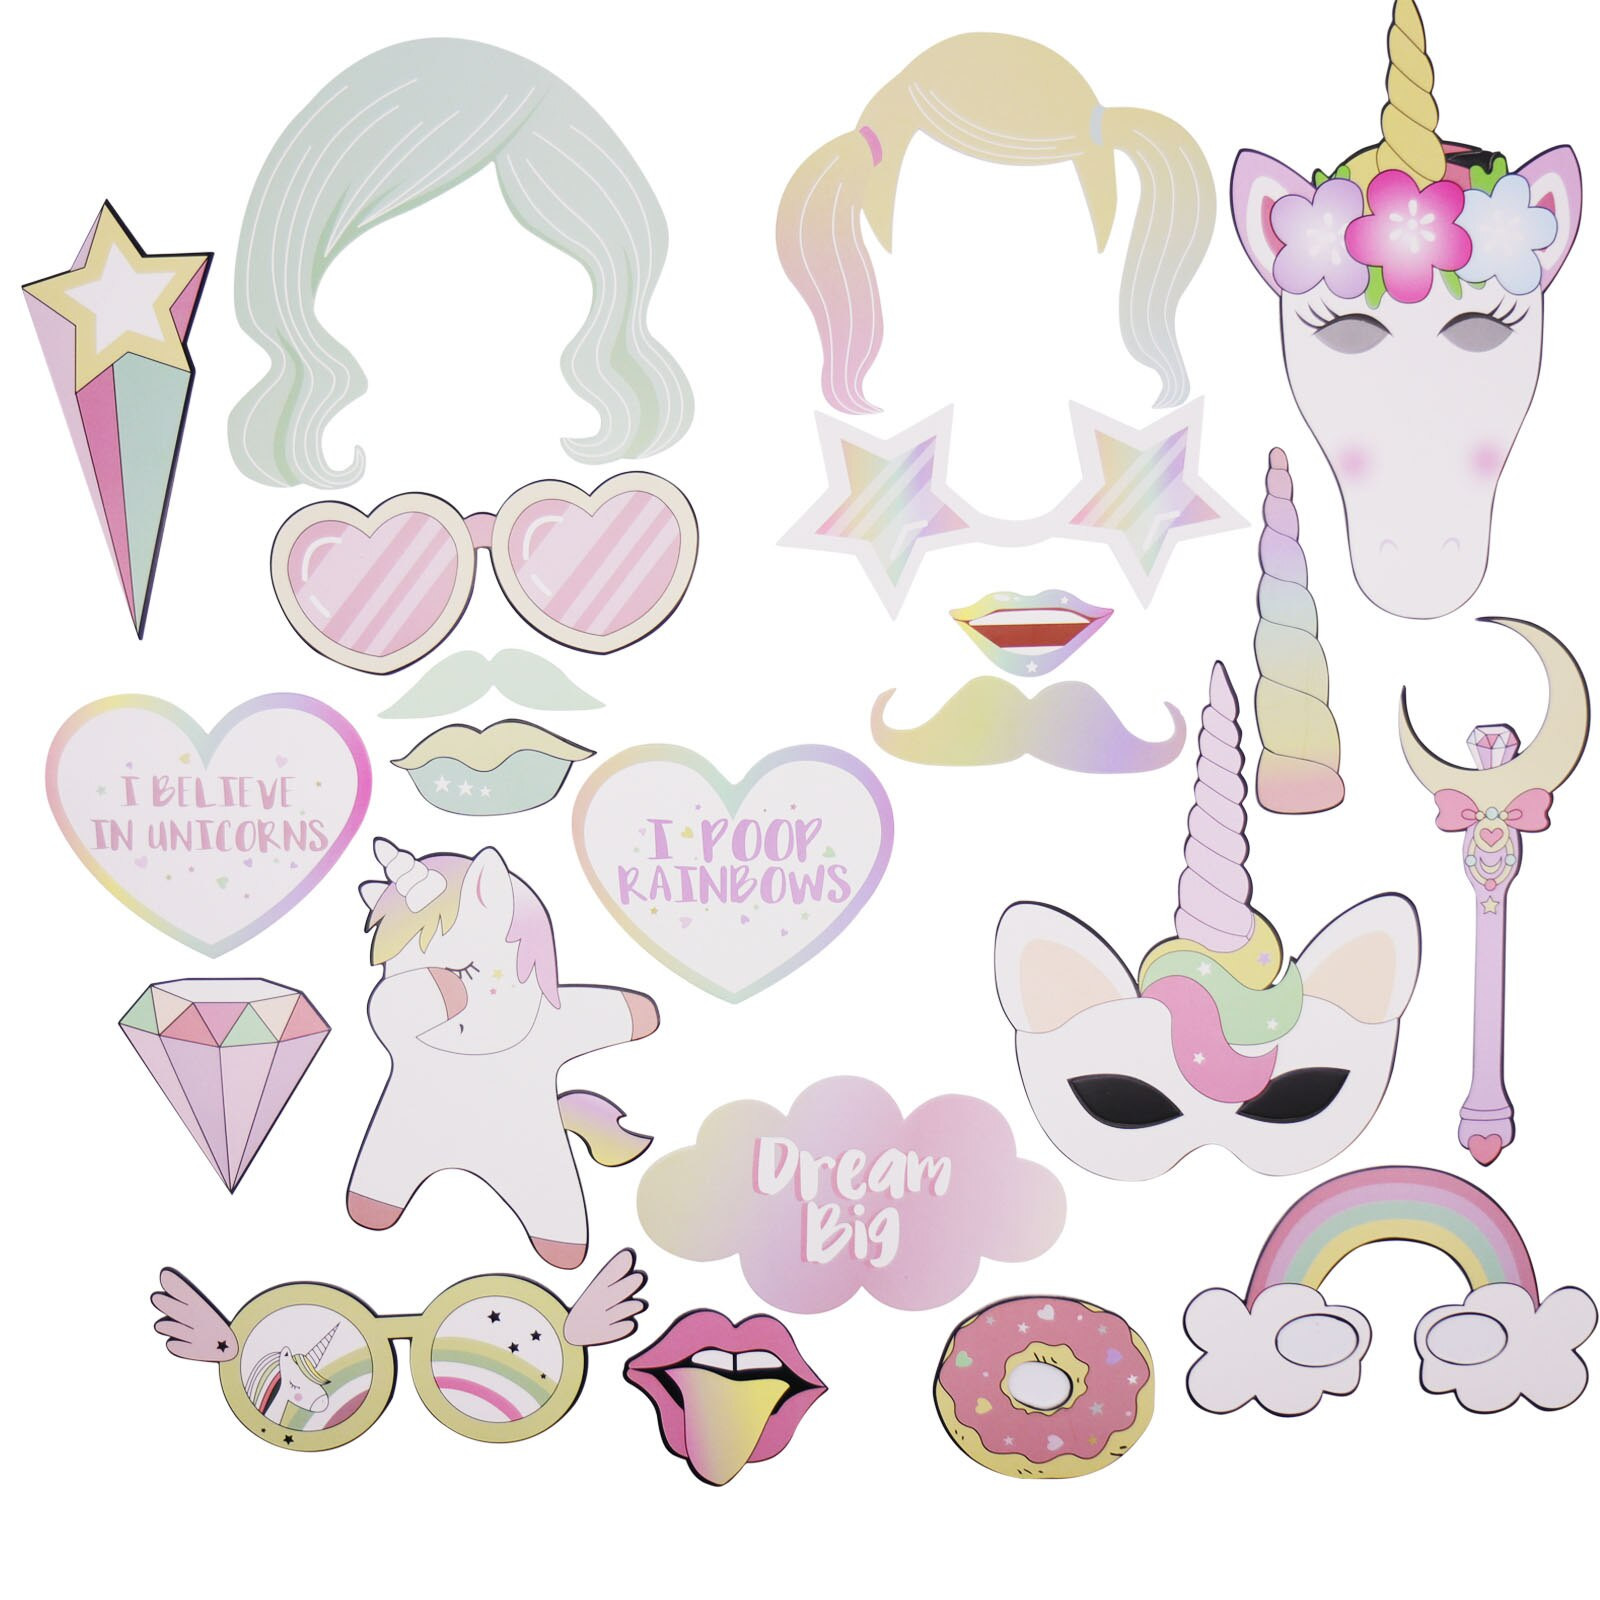 Bachelorette Party Ideas With Minors
 Aliexpress Buy 29pc Kids Unicorn Props booth